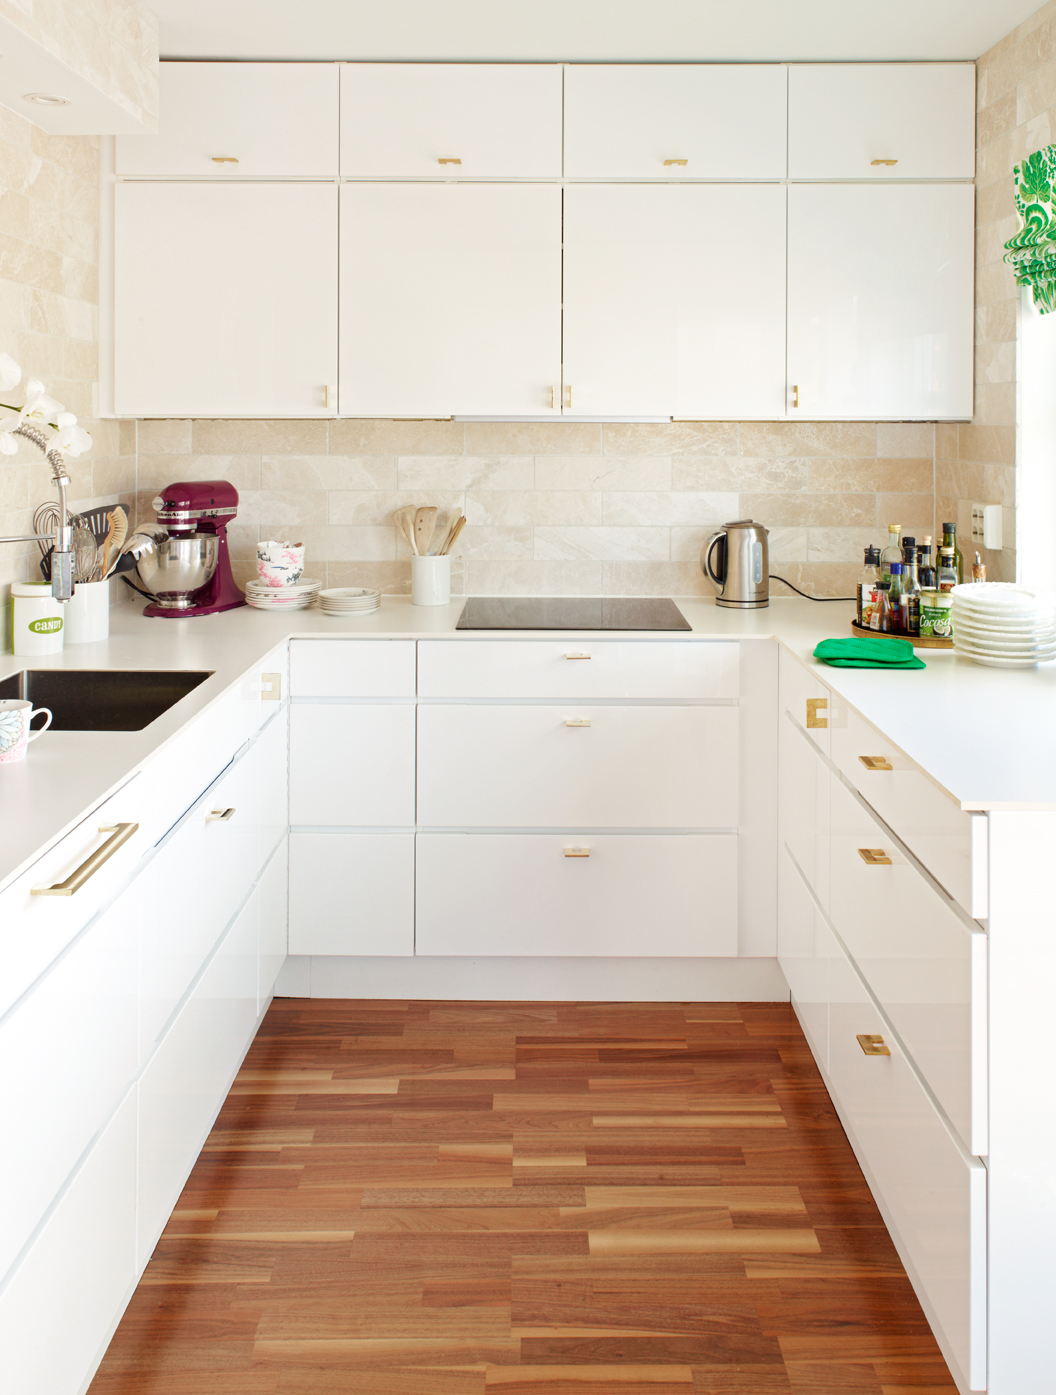 The kitchen is from Danish Kvik, the pulls (handles) are by B&B Sweden ...